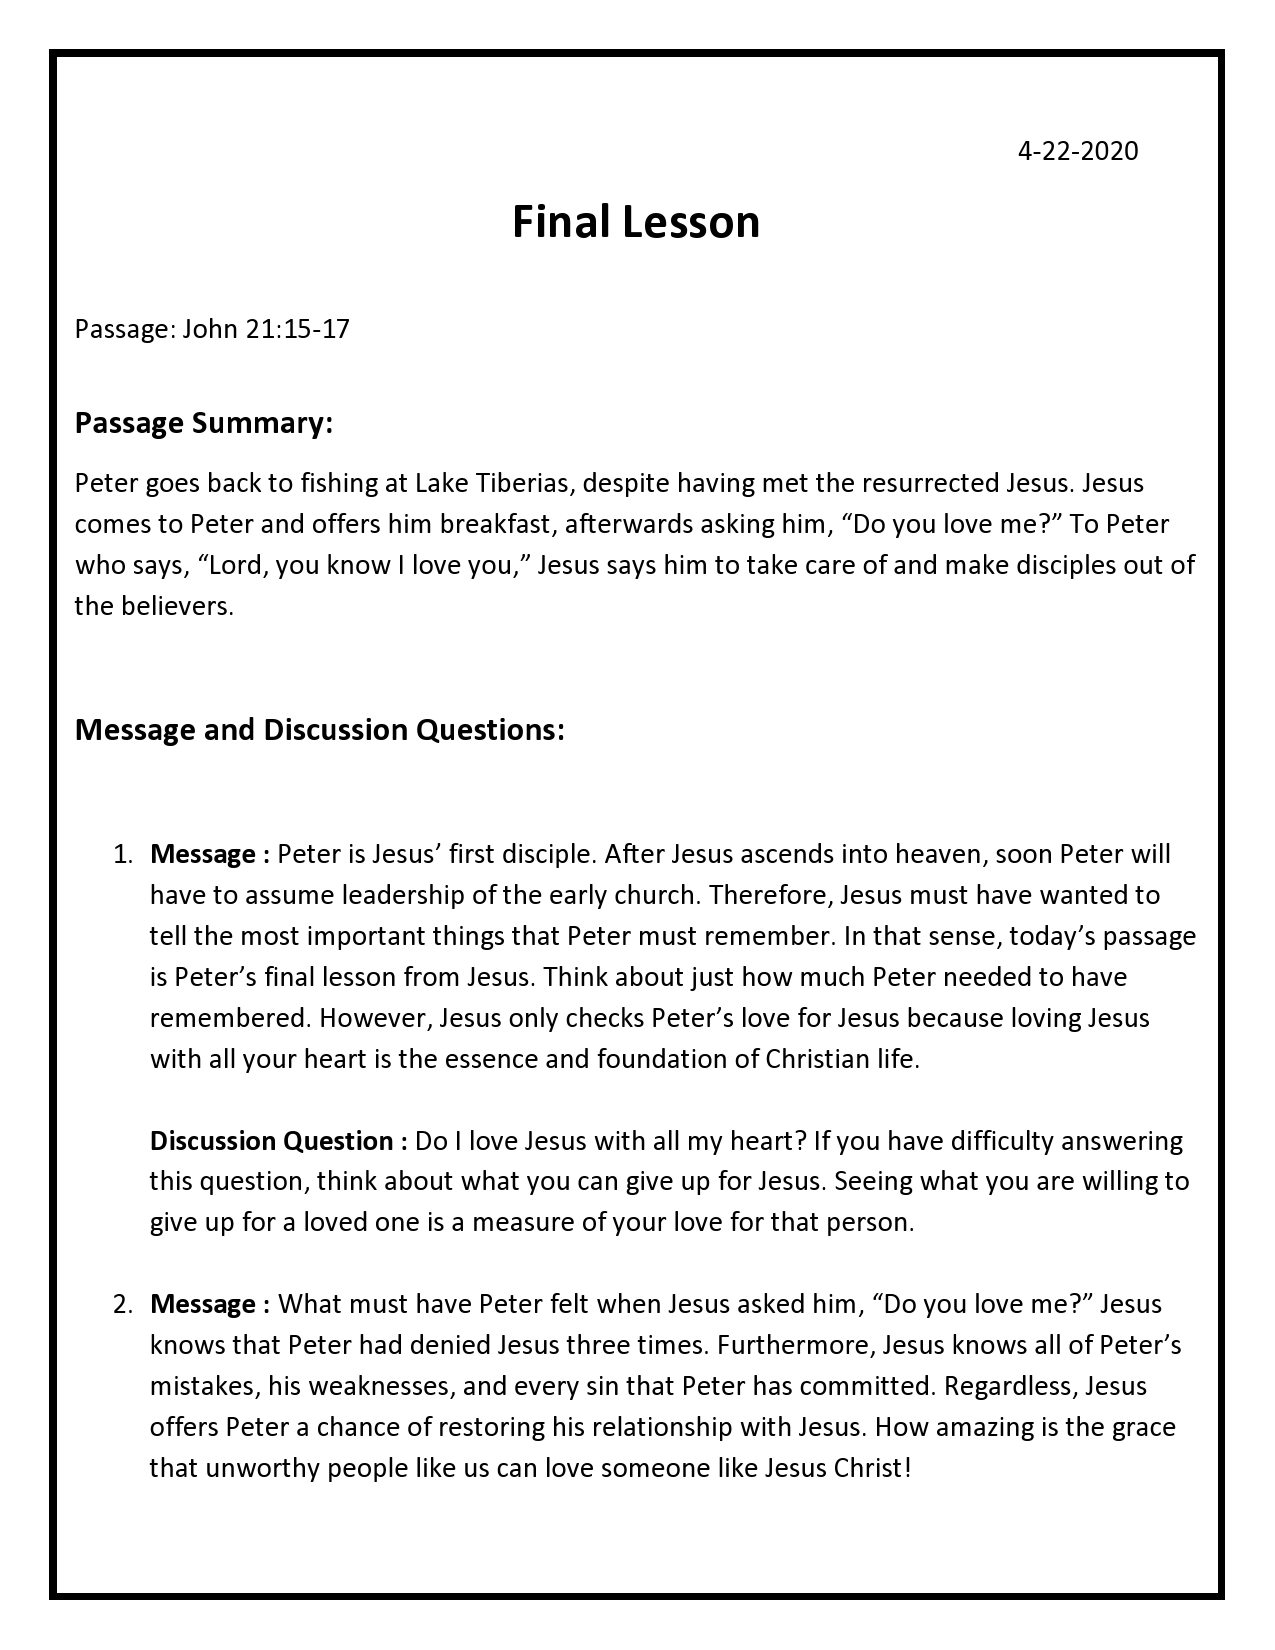 04222020 Wednesday Family Service - John 21.15-17 Final Lesson-page0001.jpg